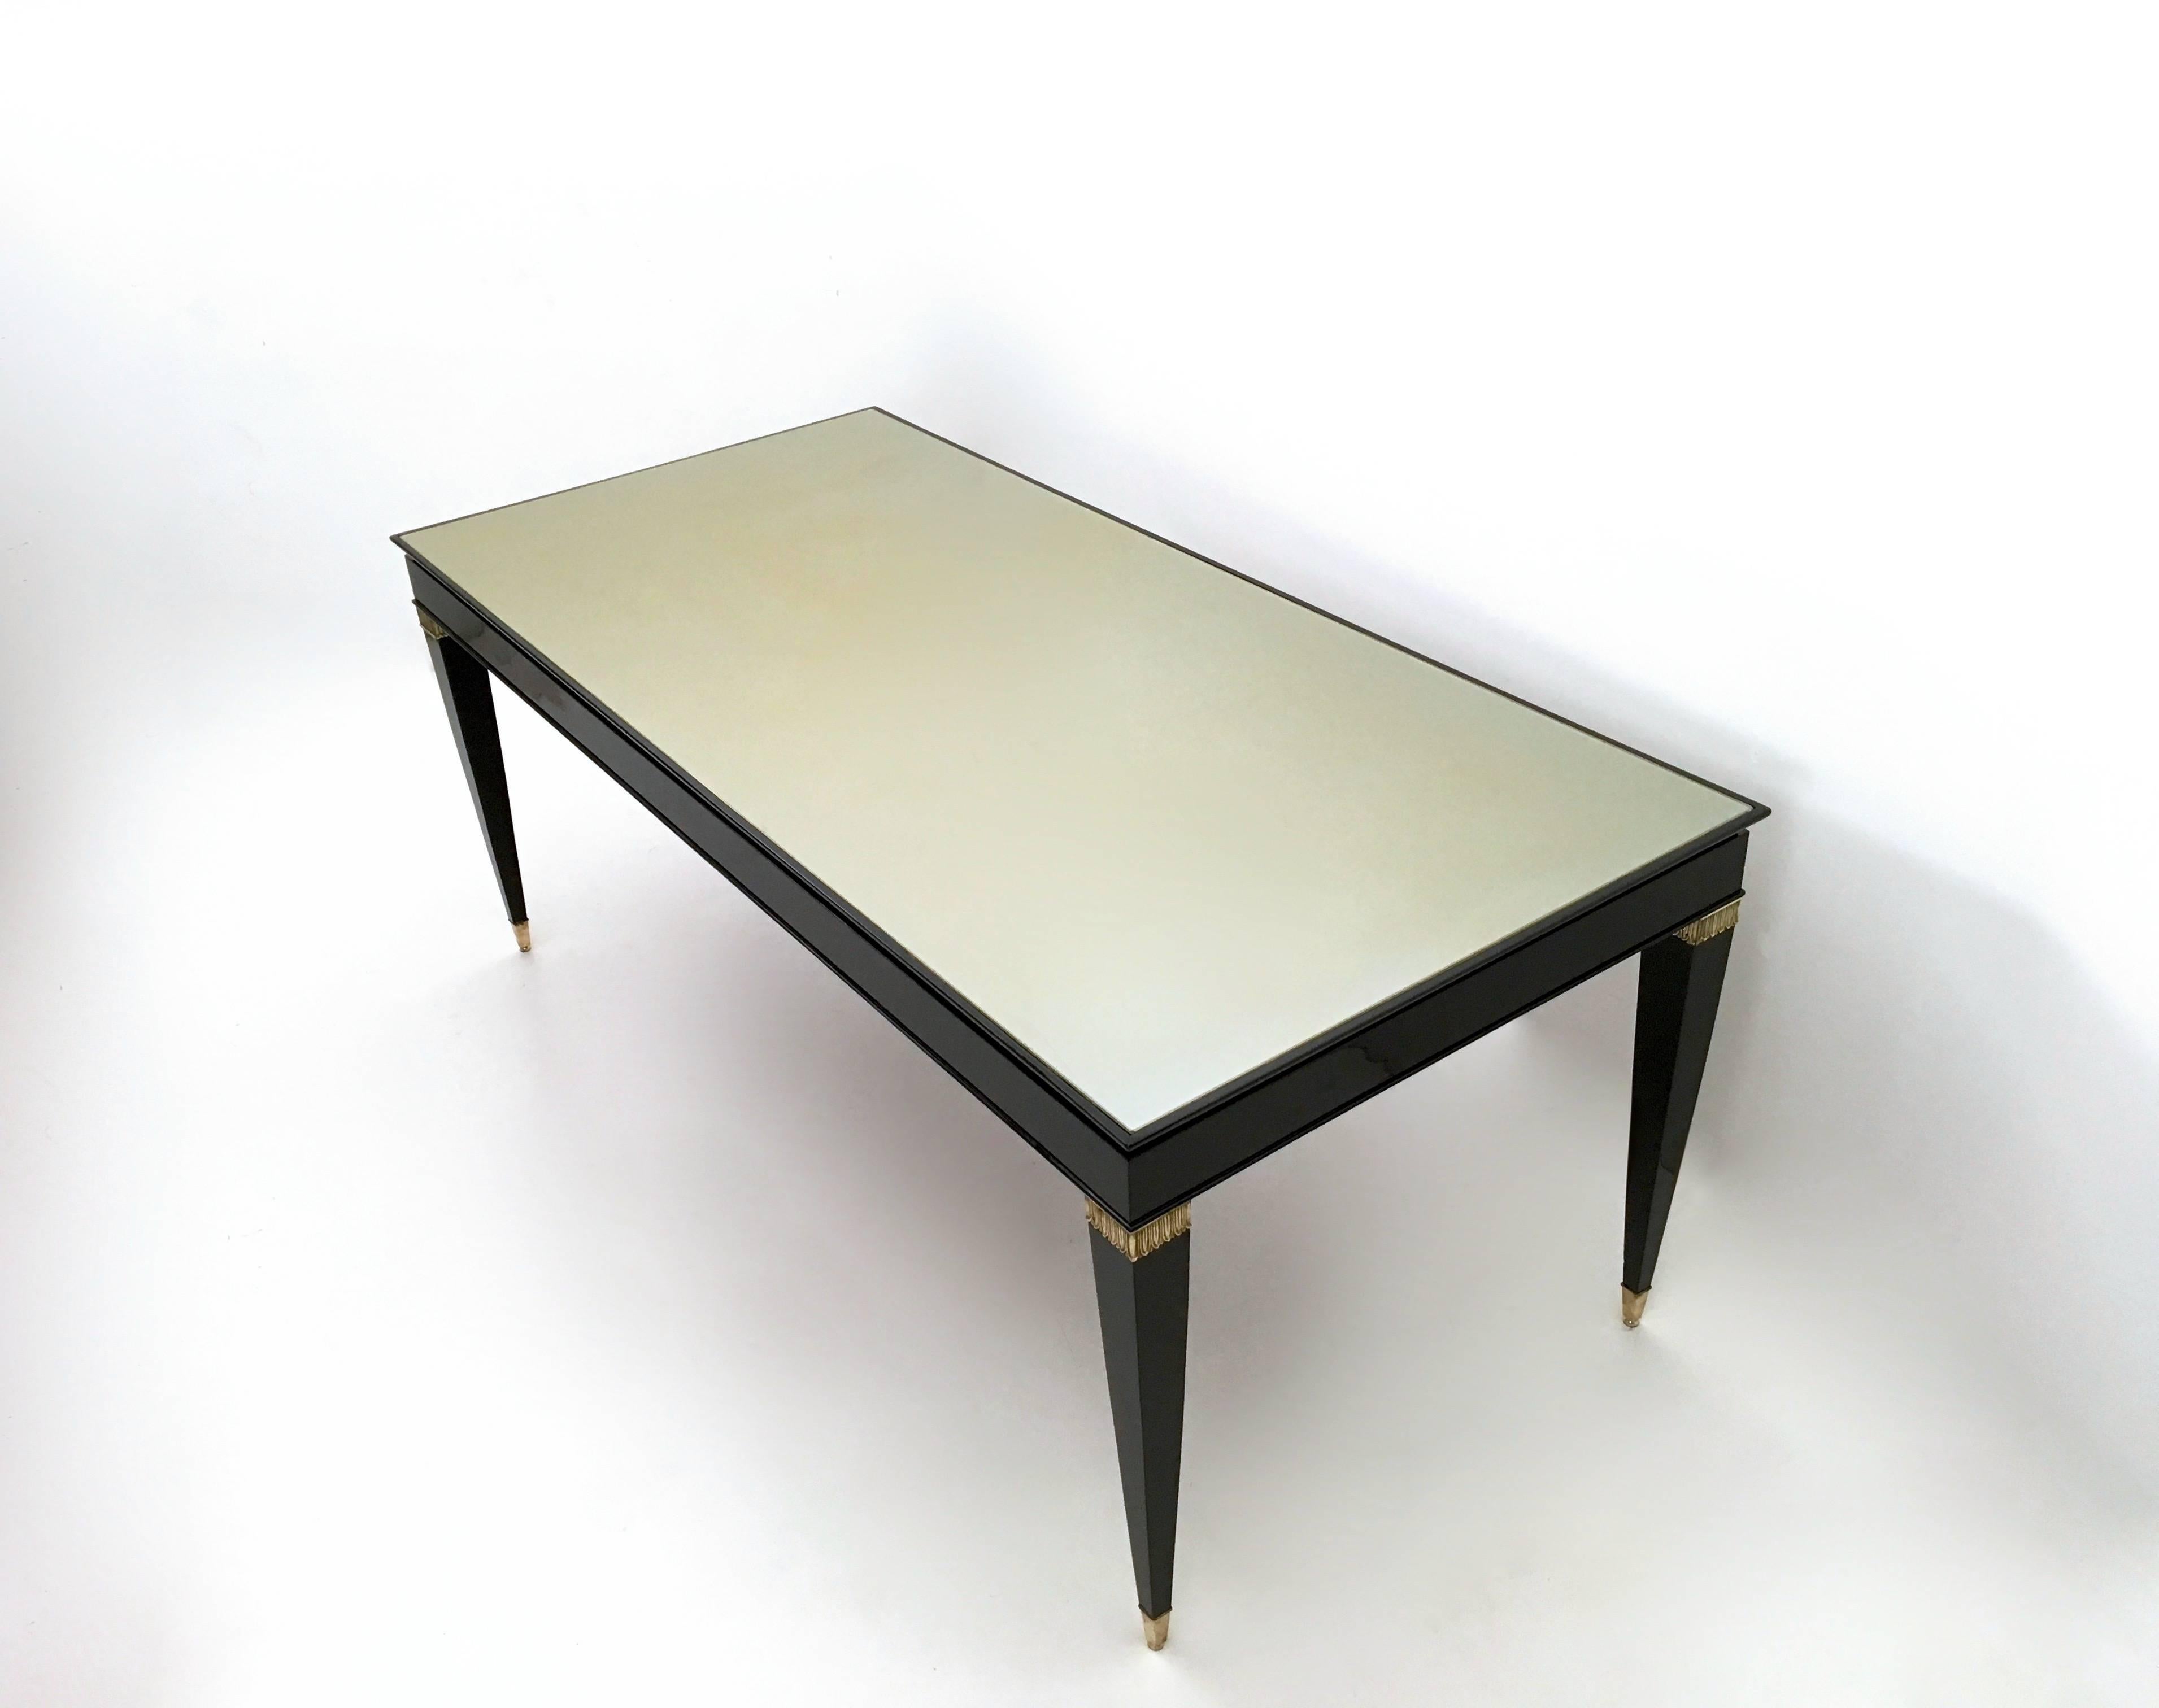 Made in Italy, 1950s.
This table is made in black lacquered beech and features brass feet caps and details and a taupe back-painted glass top.
It is a vintage item, therefore it might show slight traces of use, but it can be considered as in